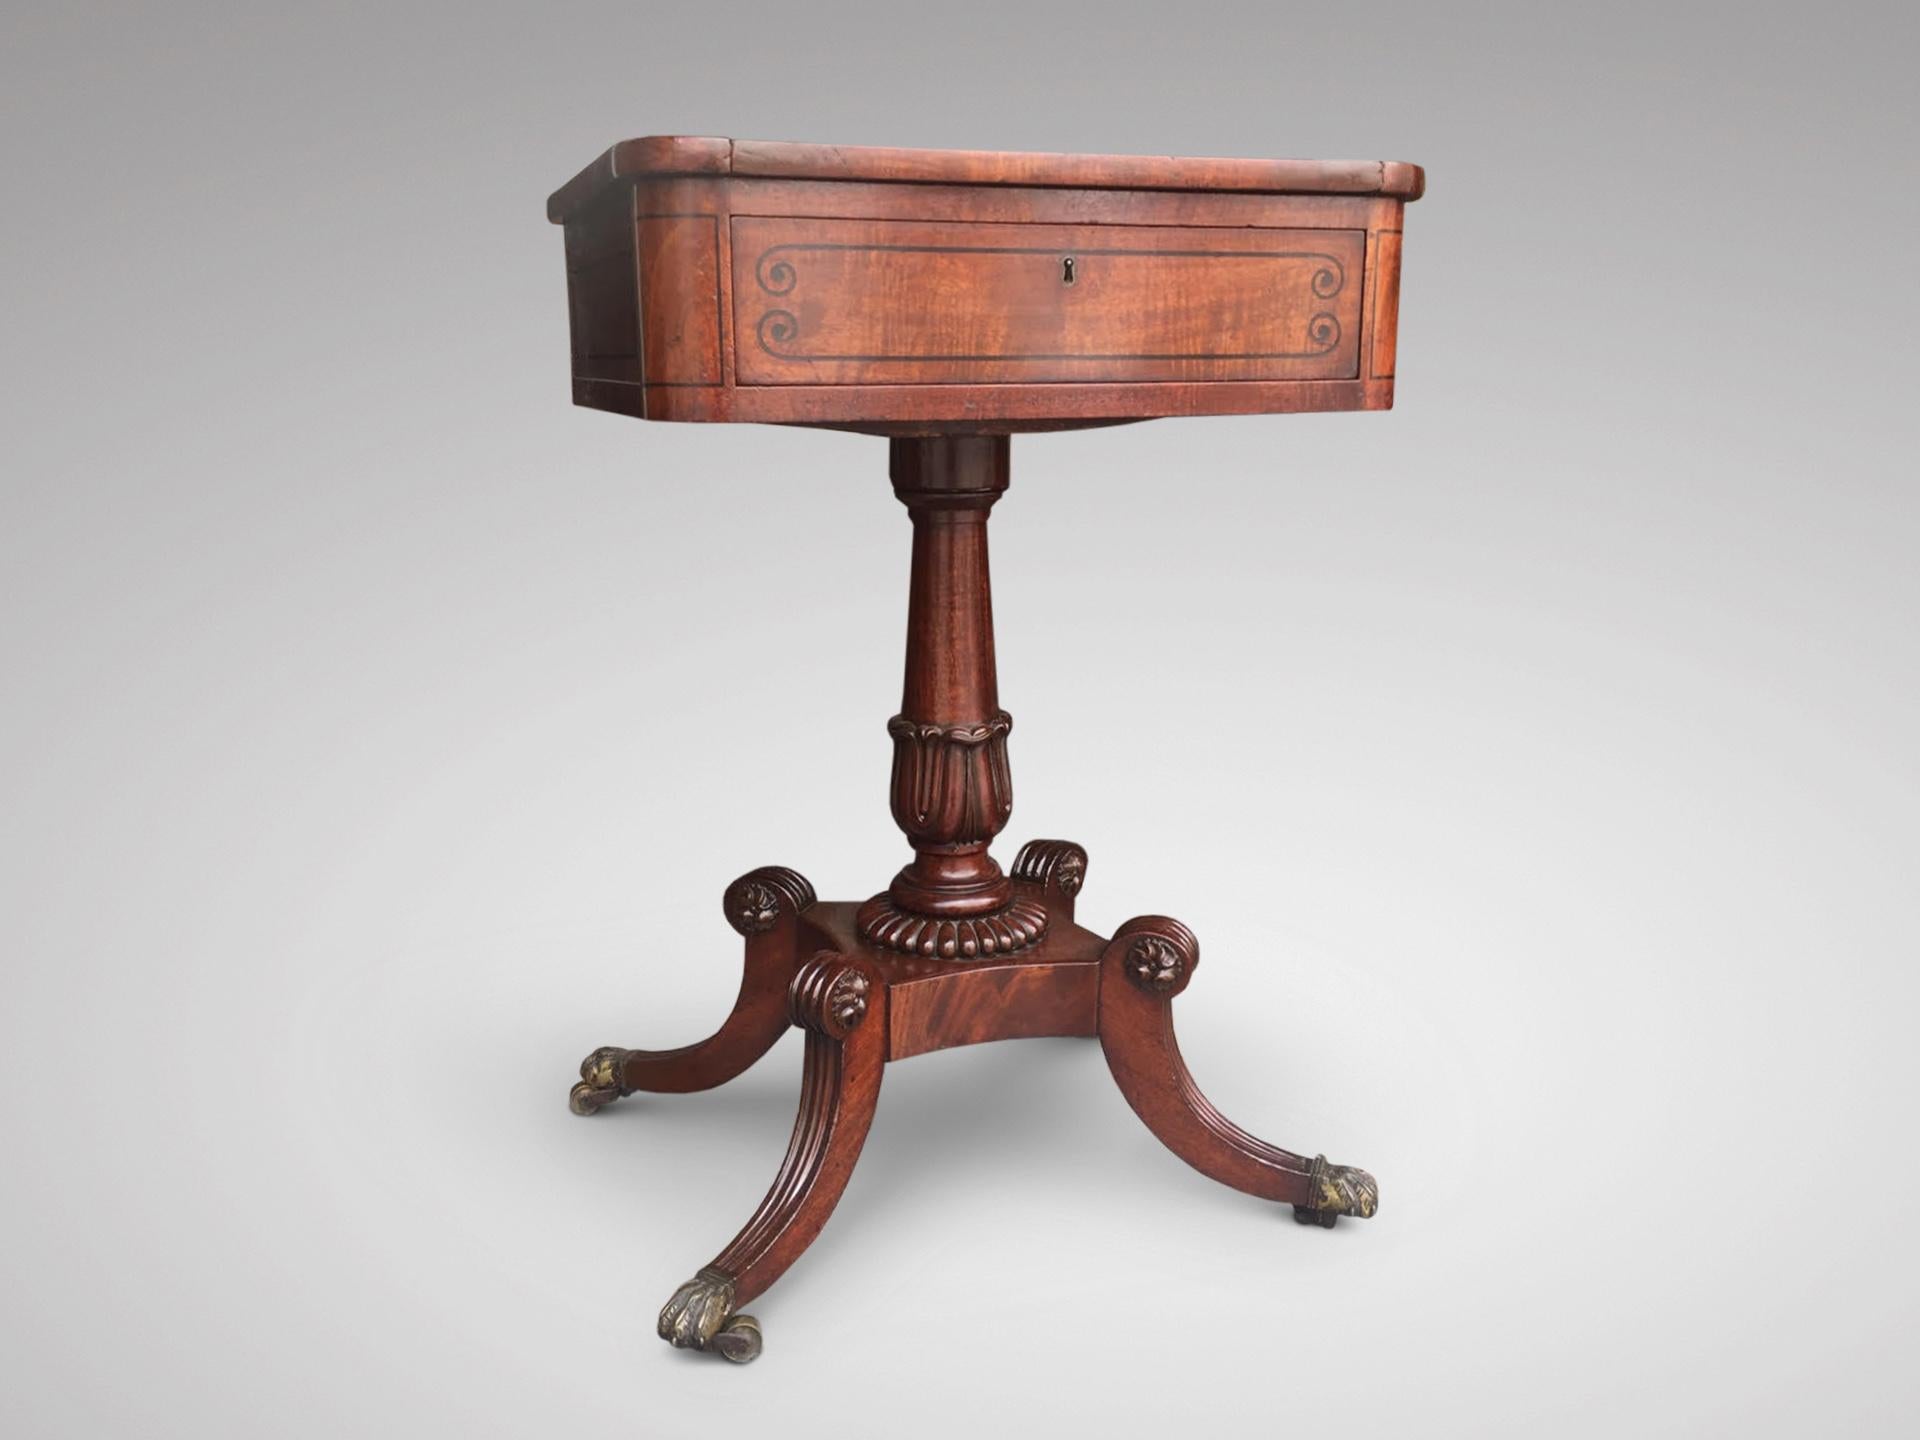 A 19th century mahogany chess table with sliding top above a drawer which features compartments raised on a column with quad form base, four splayed feet ending on brass castors. Georgian period.

The dimensions are:
Height: 71cm (28.0in)
Width: